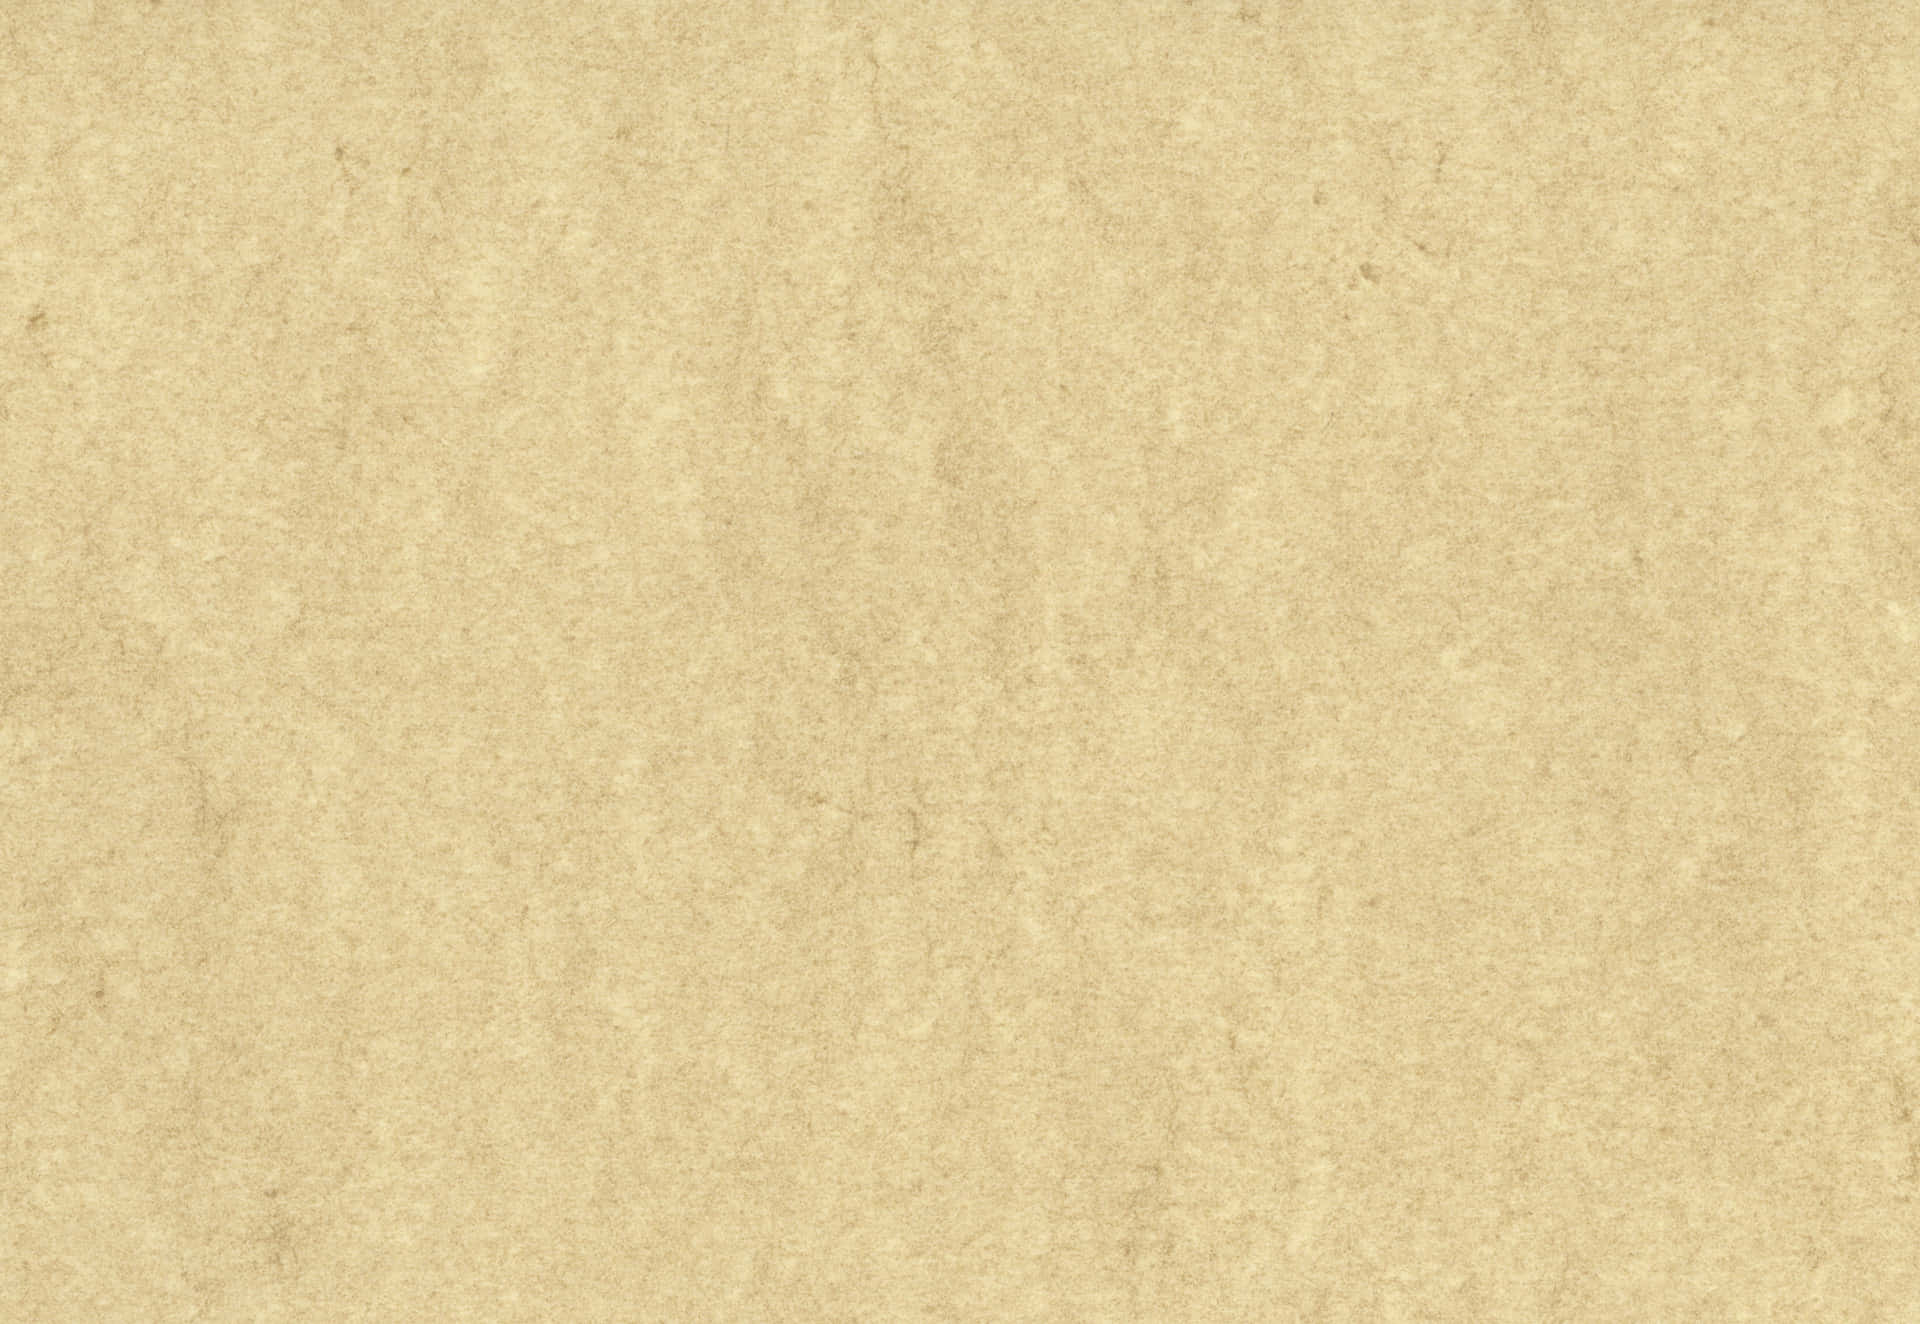 Close-up of a textured brown paper background Wallpaper